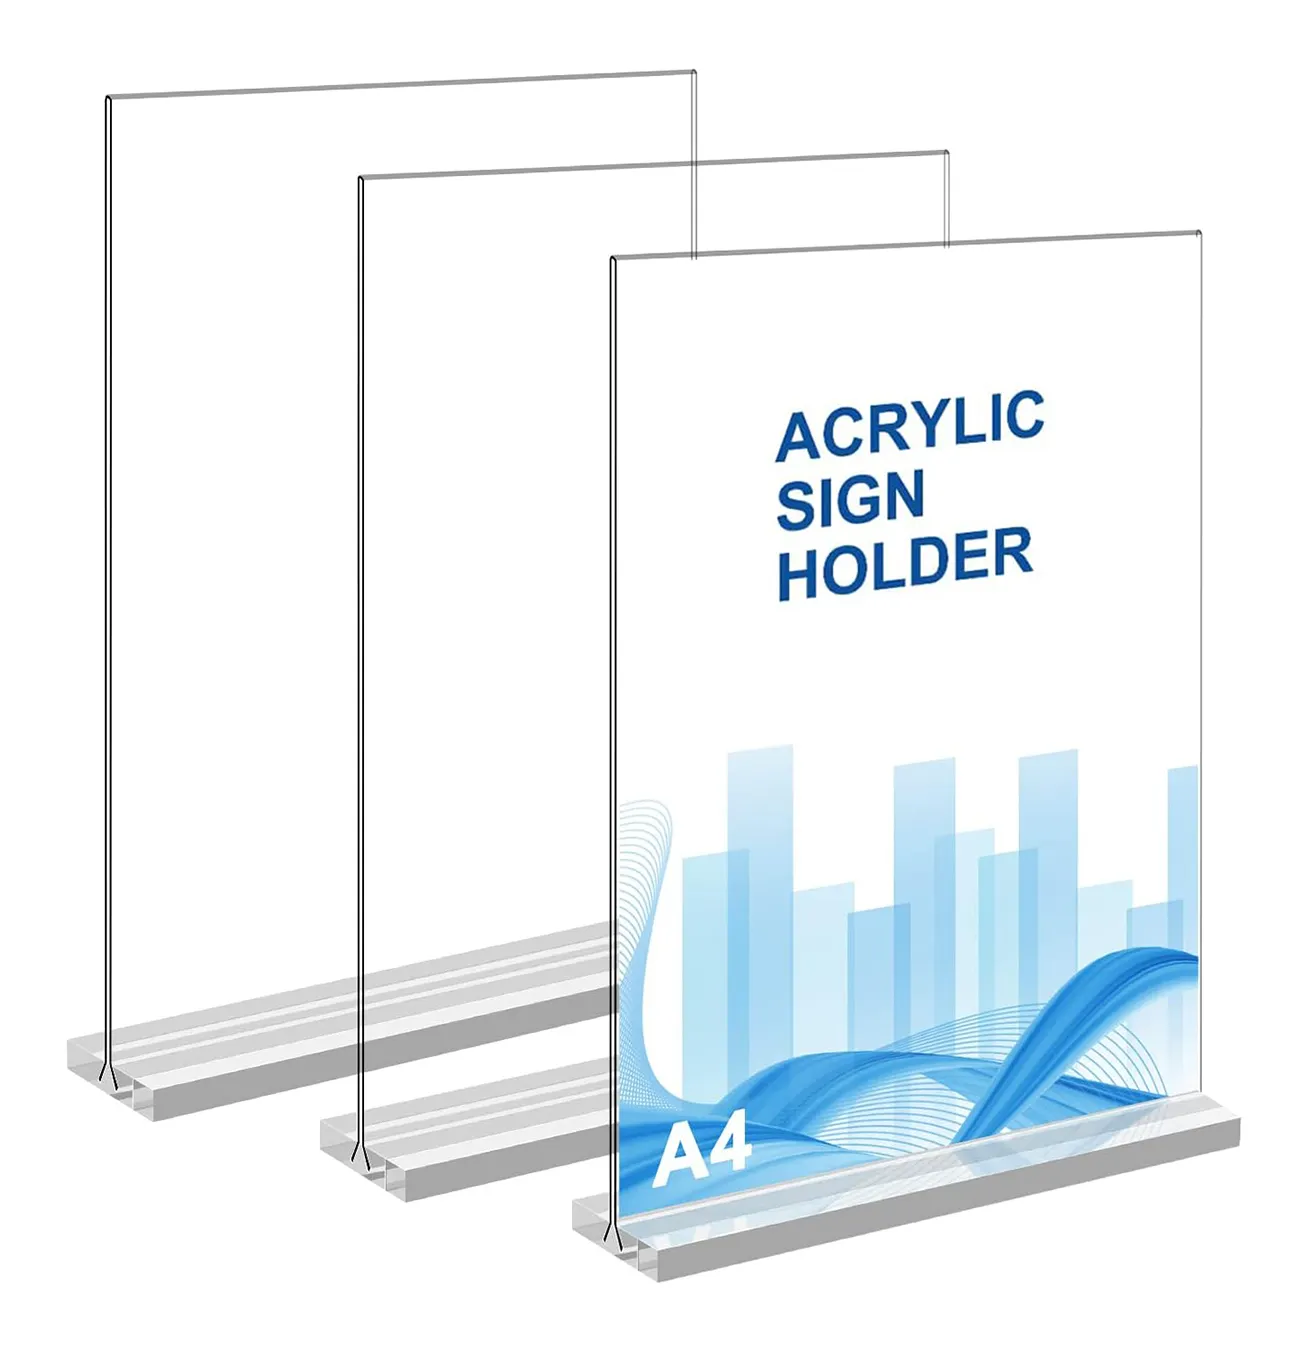 Acrylic Sign Holder, Double-Sided Display Stand Plastic Paper Holder Table Menu Display Stand T-Shaped Desktop Display Stand